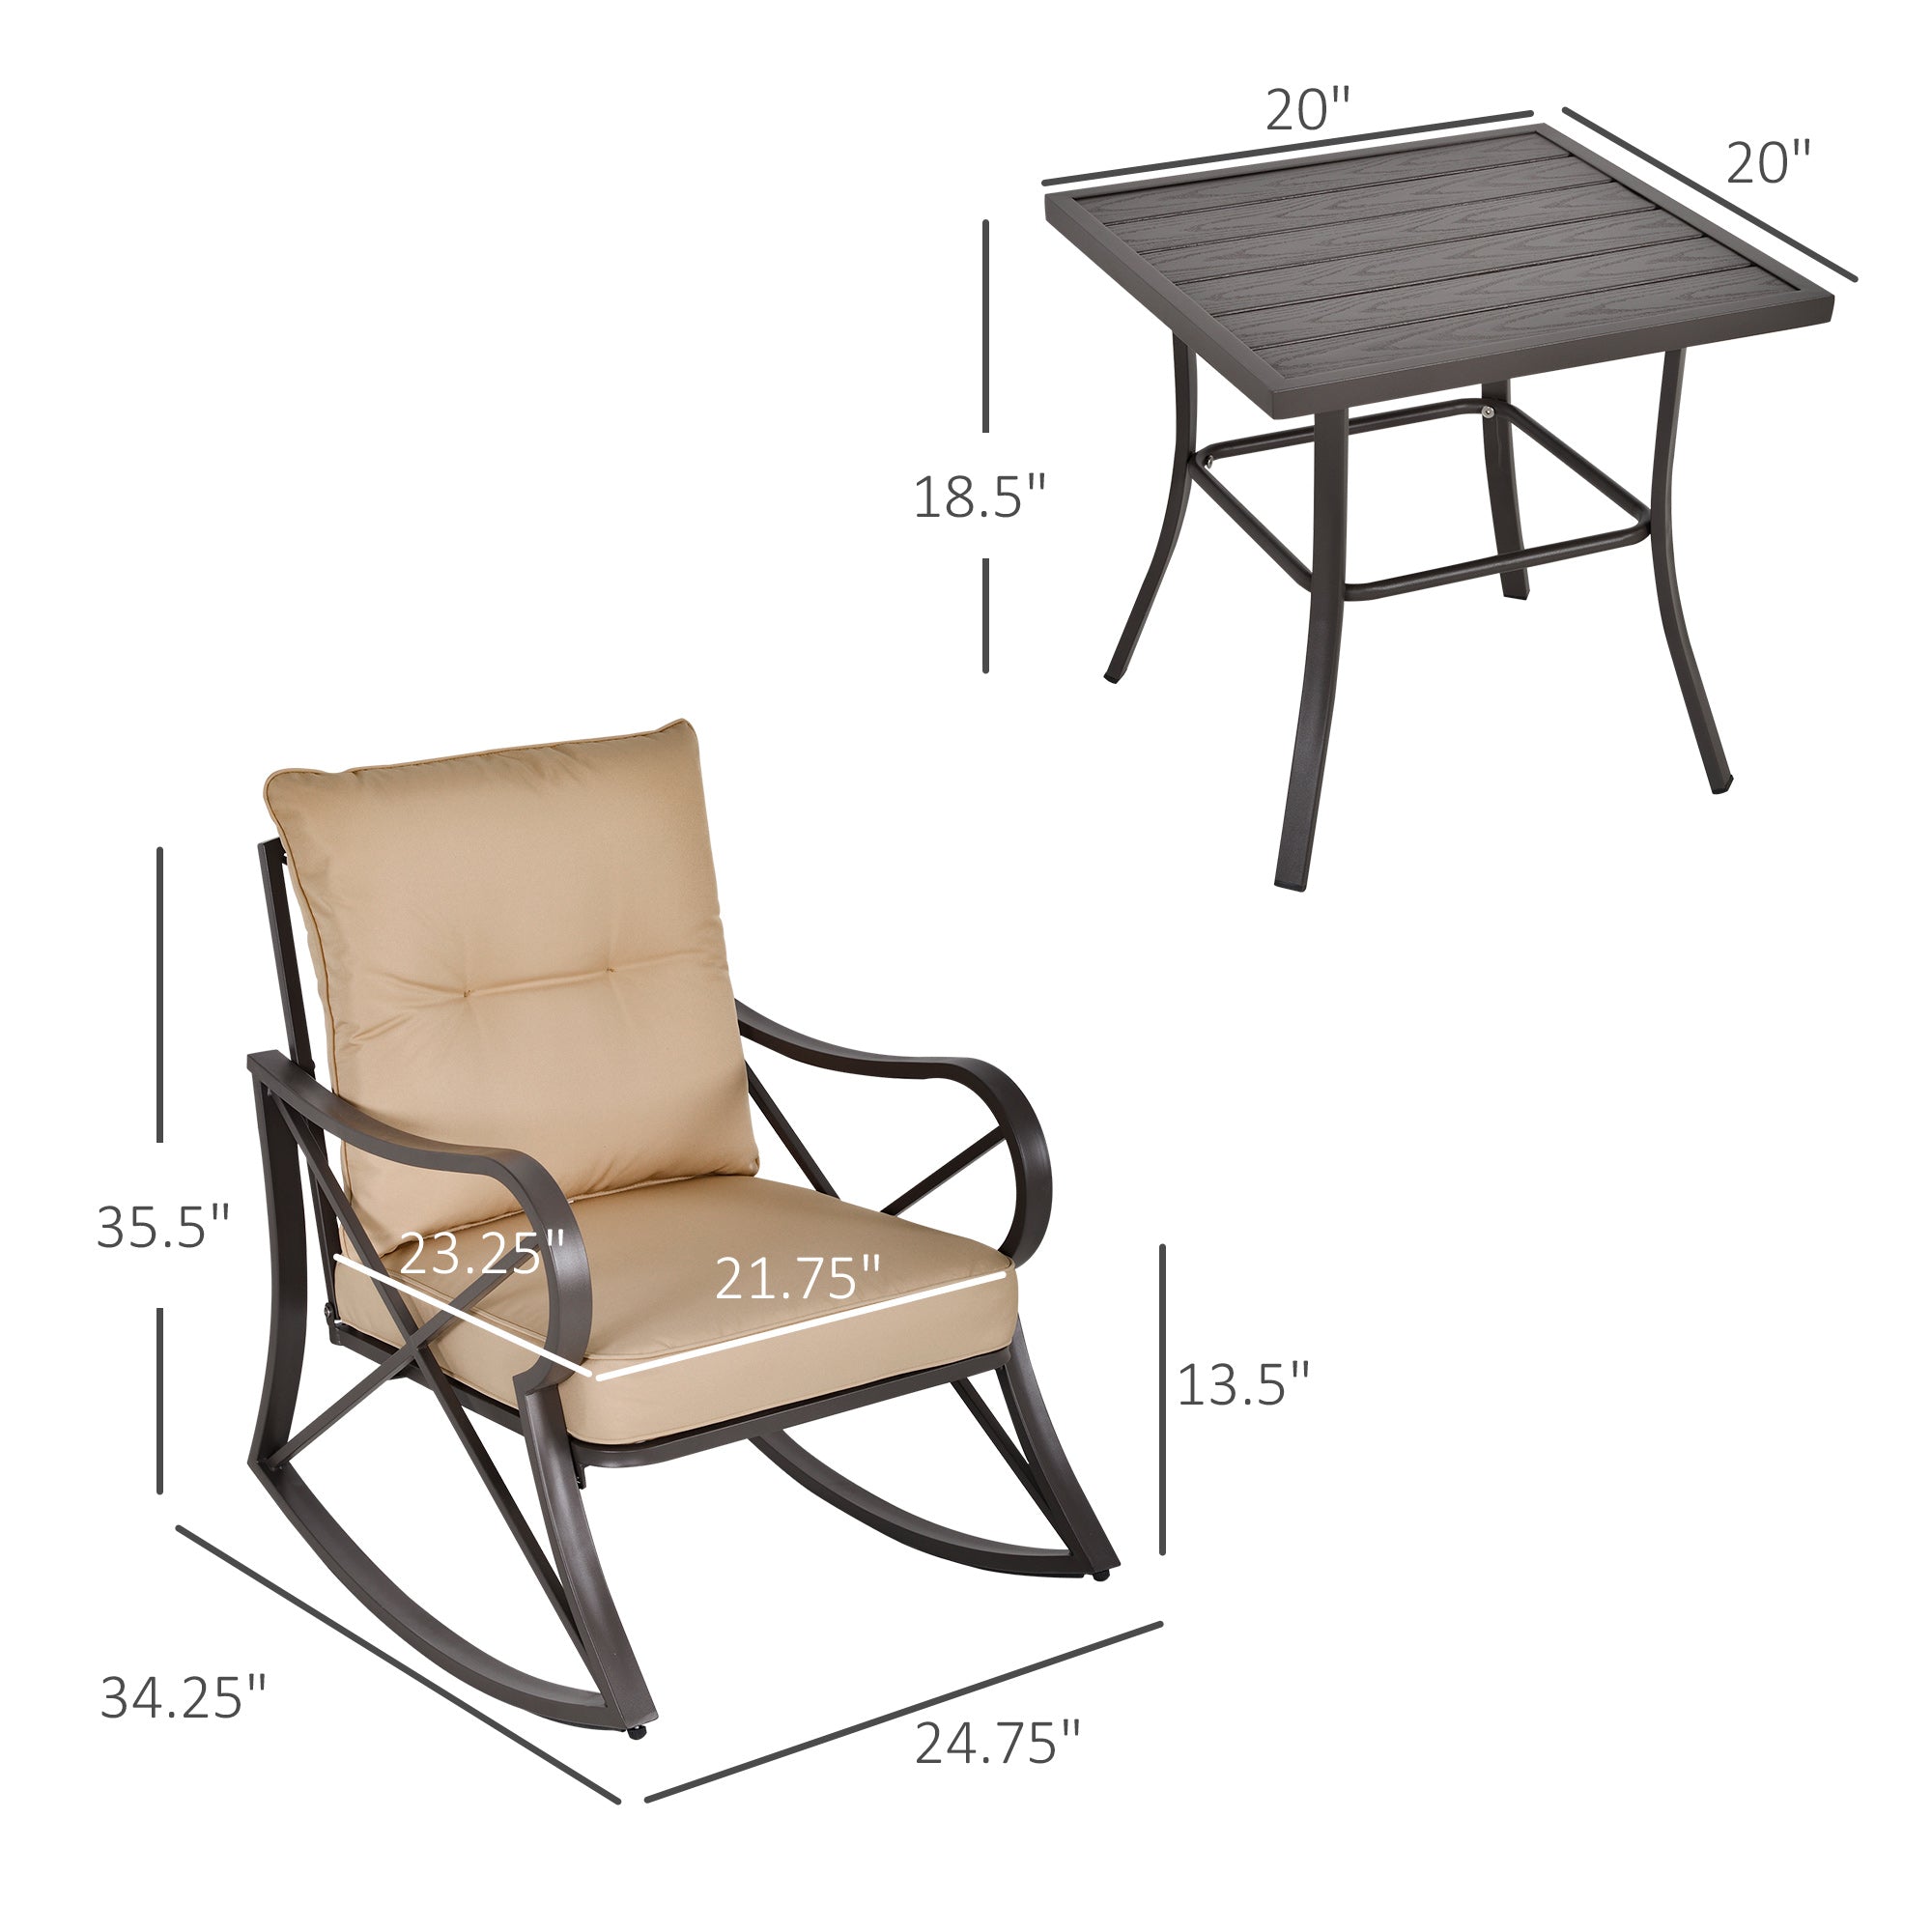 3 Piece Outdoor Patio Rocking Chair Set with Coffee Table Garden Bistro Set with Cushions - Beige